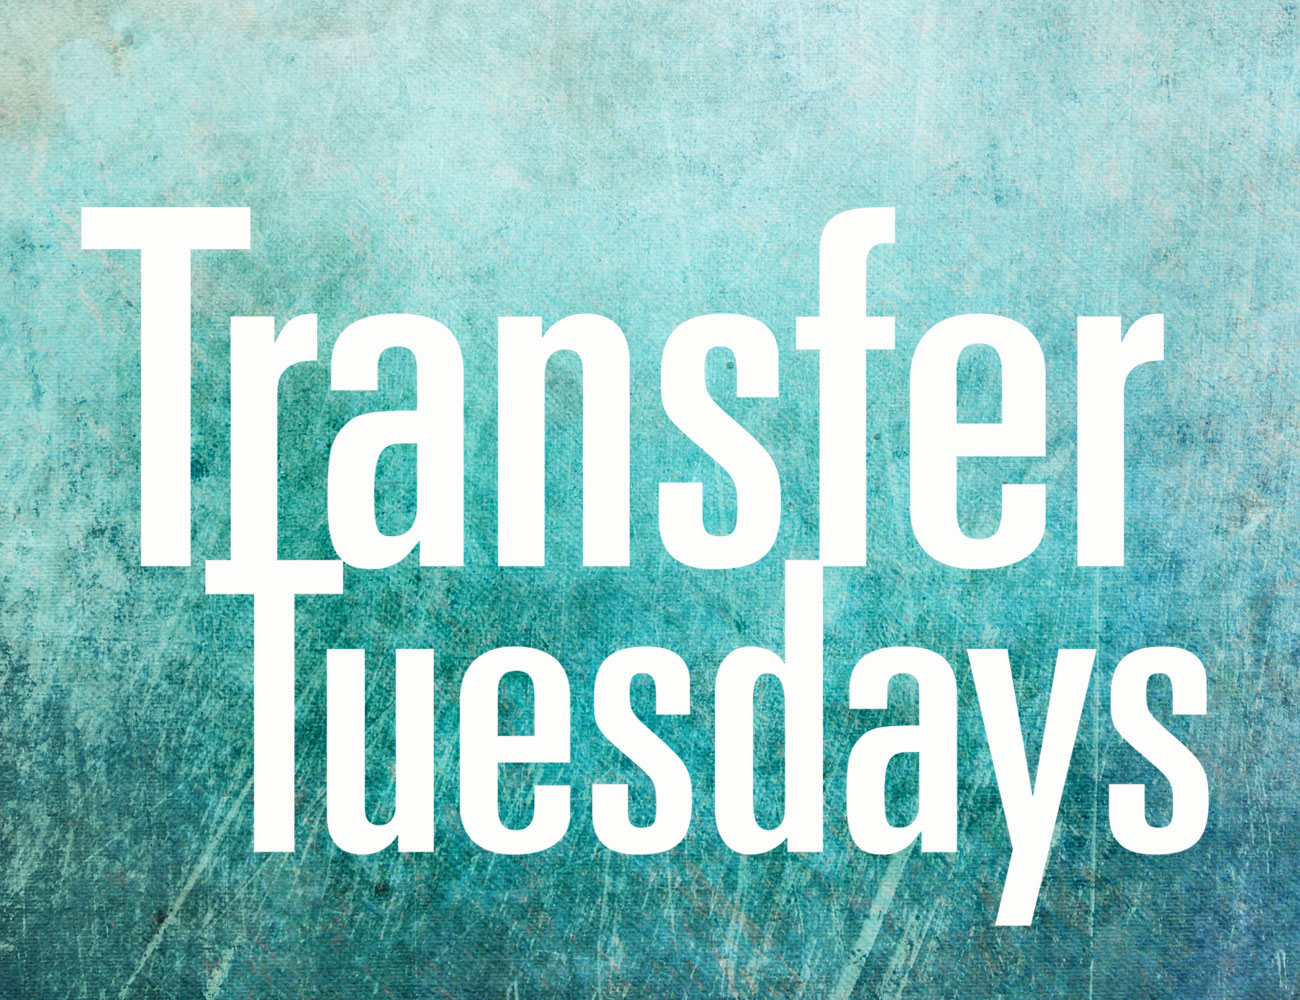 Tackle Your Transfer This Tuesday